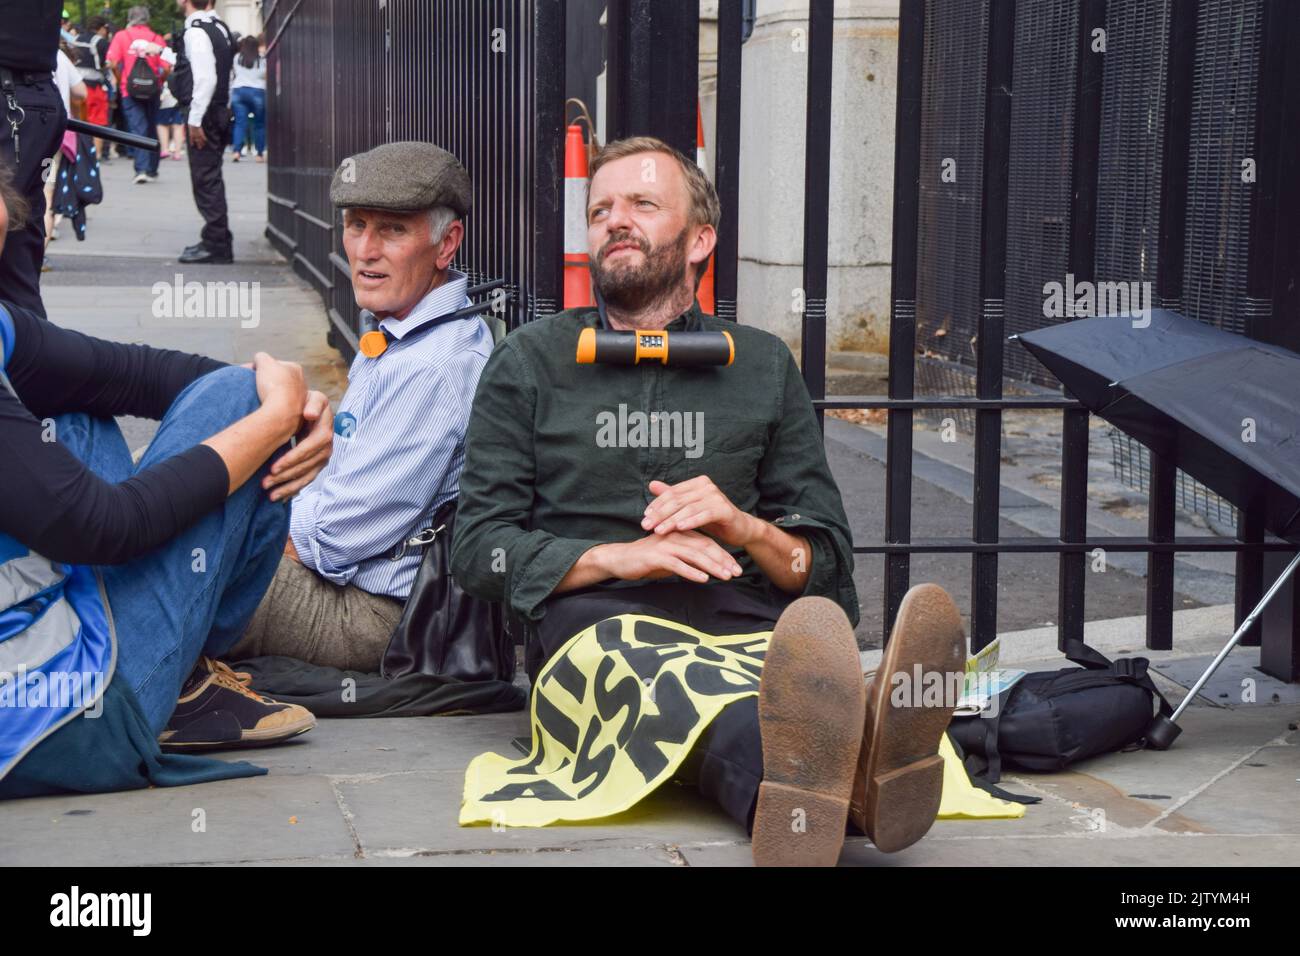 London, UK. 2nd September 2022. Activists sit with necks locked to the fence outside Parliament. Extinction Rebellion protesters glued themselves inside the Parliament while others locked and glued themselves outside, demanding a Citizens' Assembly. Credit: Vuk Valcic/Alamy Live News Stock Photo